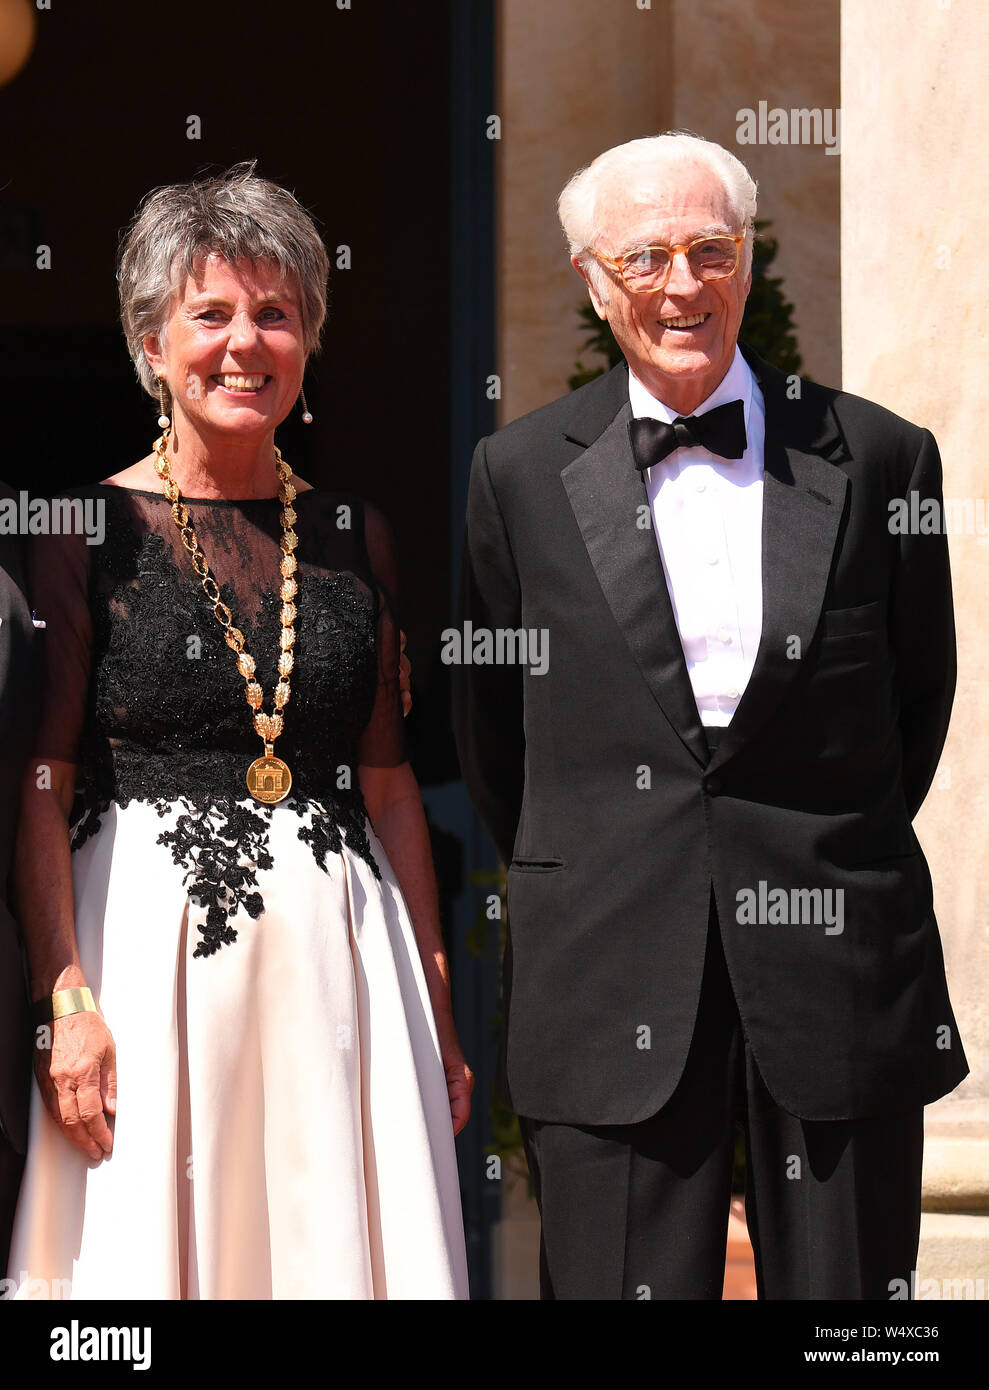 Bayreuth, Germany. 25th July, 2019. Franz Herzog von Bayern stands next to the Lord Mayor of Bayreuth Brigitte Merk-Erbe at the Bayreuth Festival 2019. The Richard Wagner Festival began in Bayreuth on Thursday. Credit: Tobias Hase/dpa/Alamy Live News Stock Photo